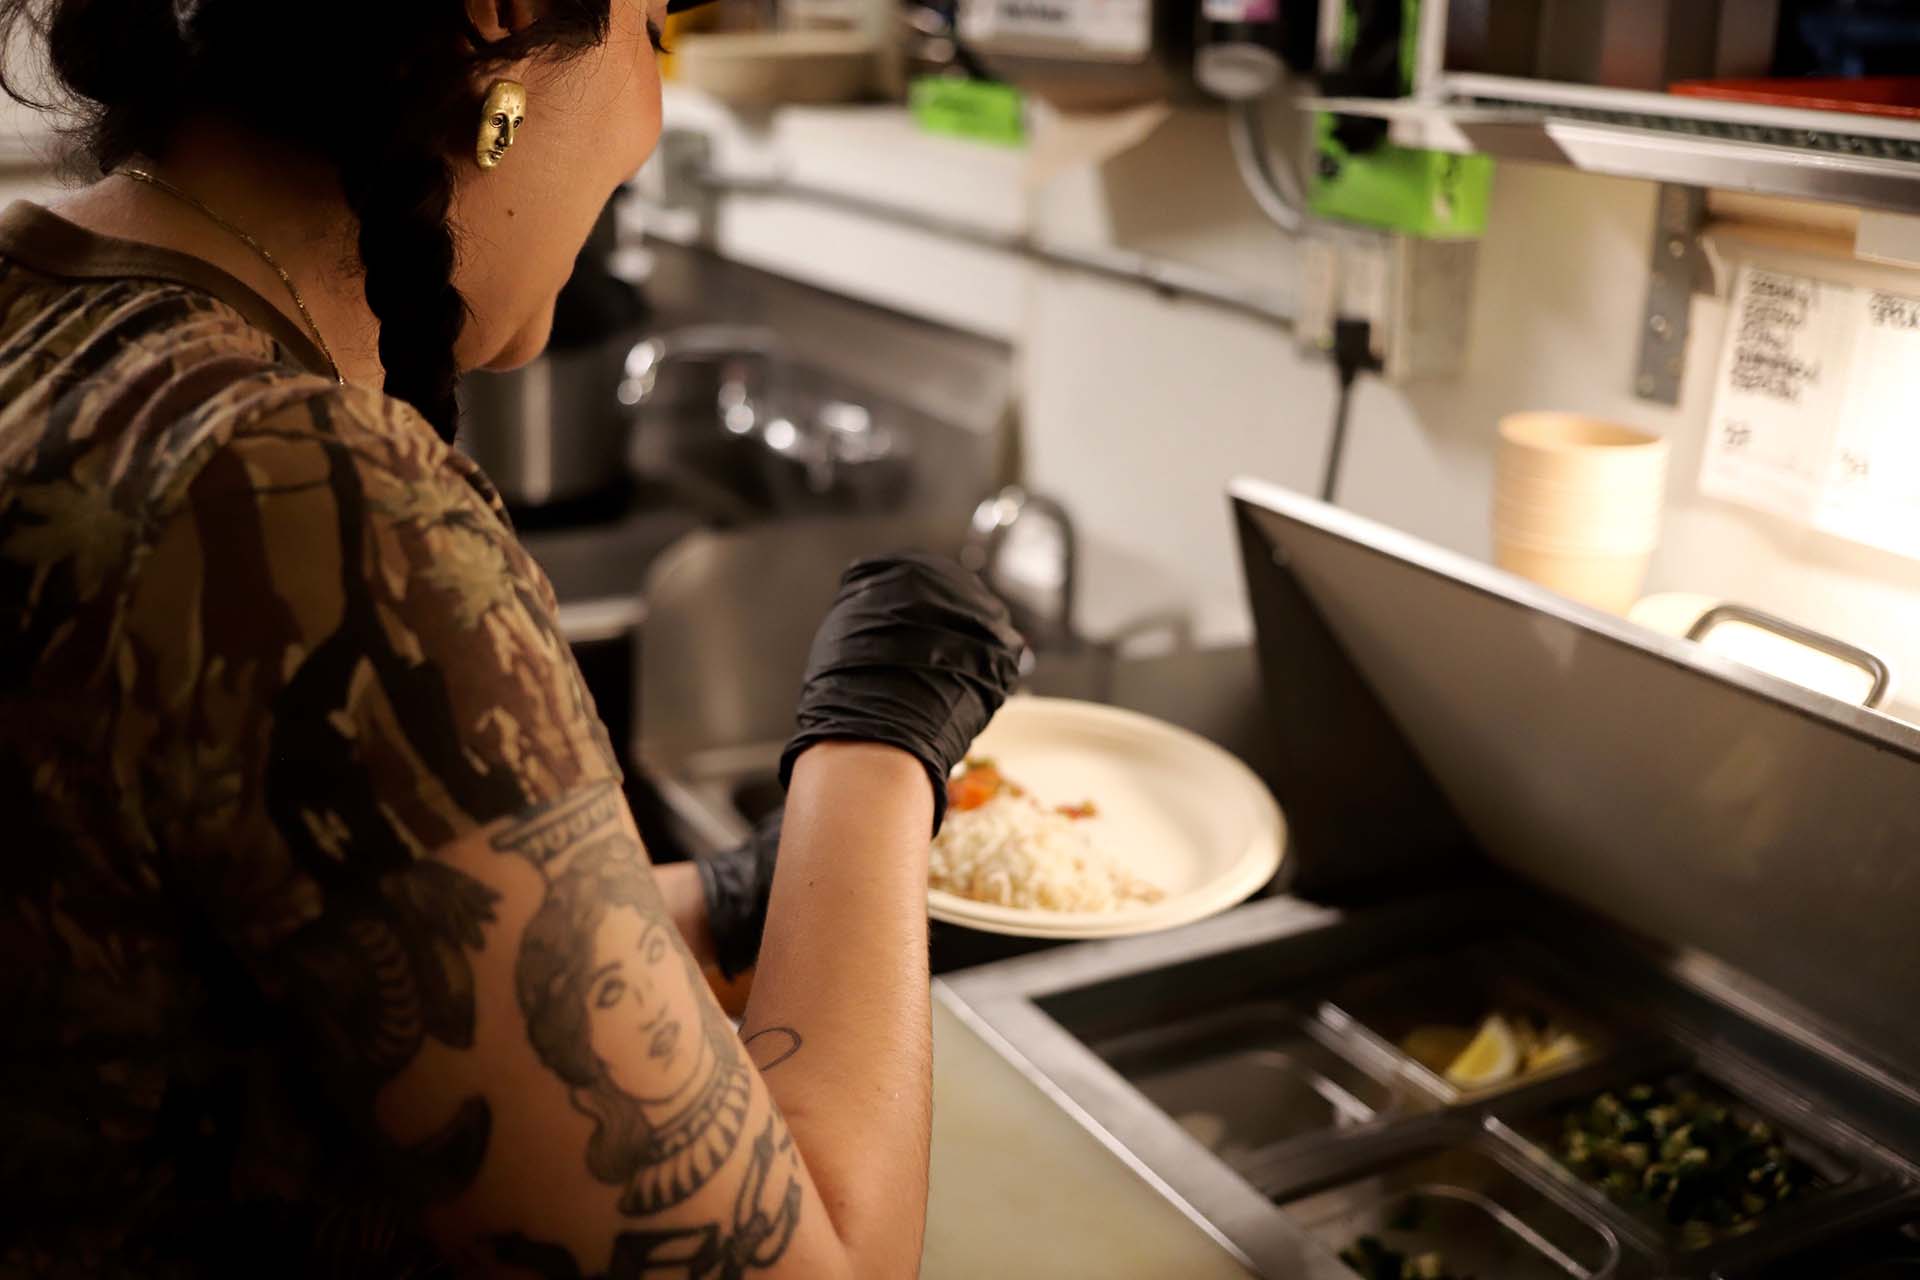 Tattooed woman wearing black plastic gloves prepares a plate of rice inside a restaurant kitchen.